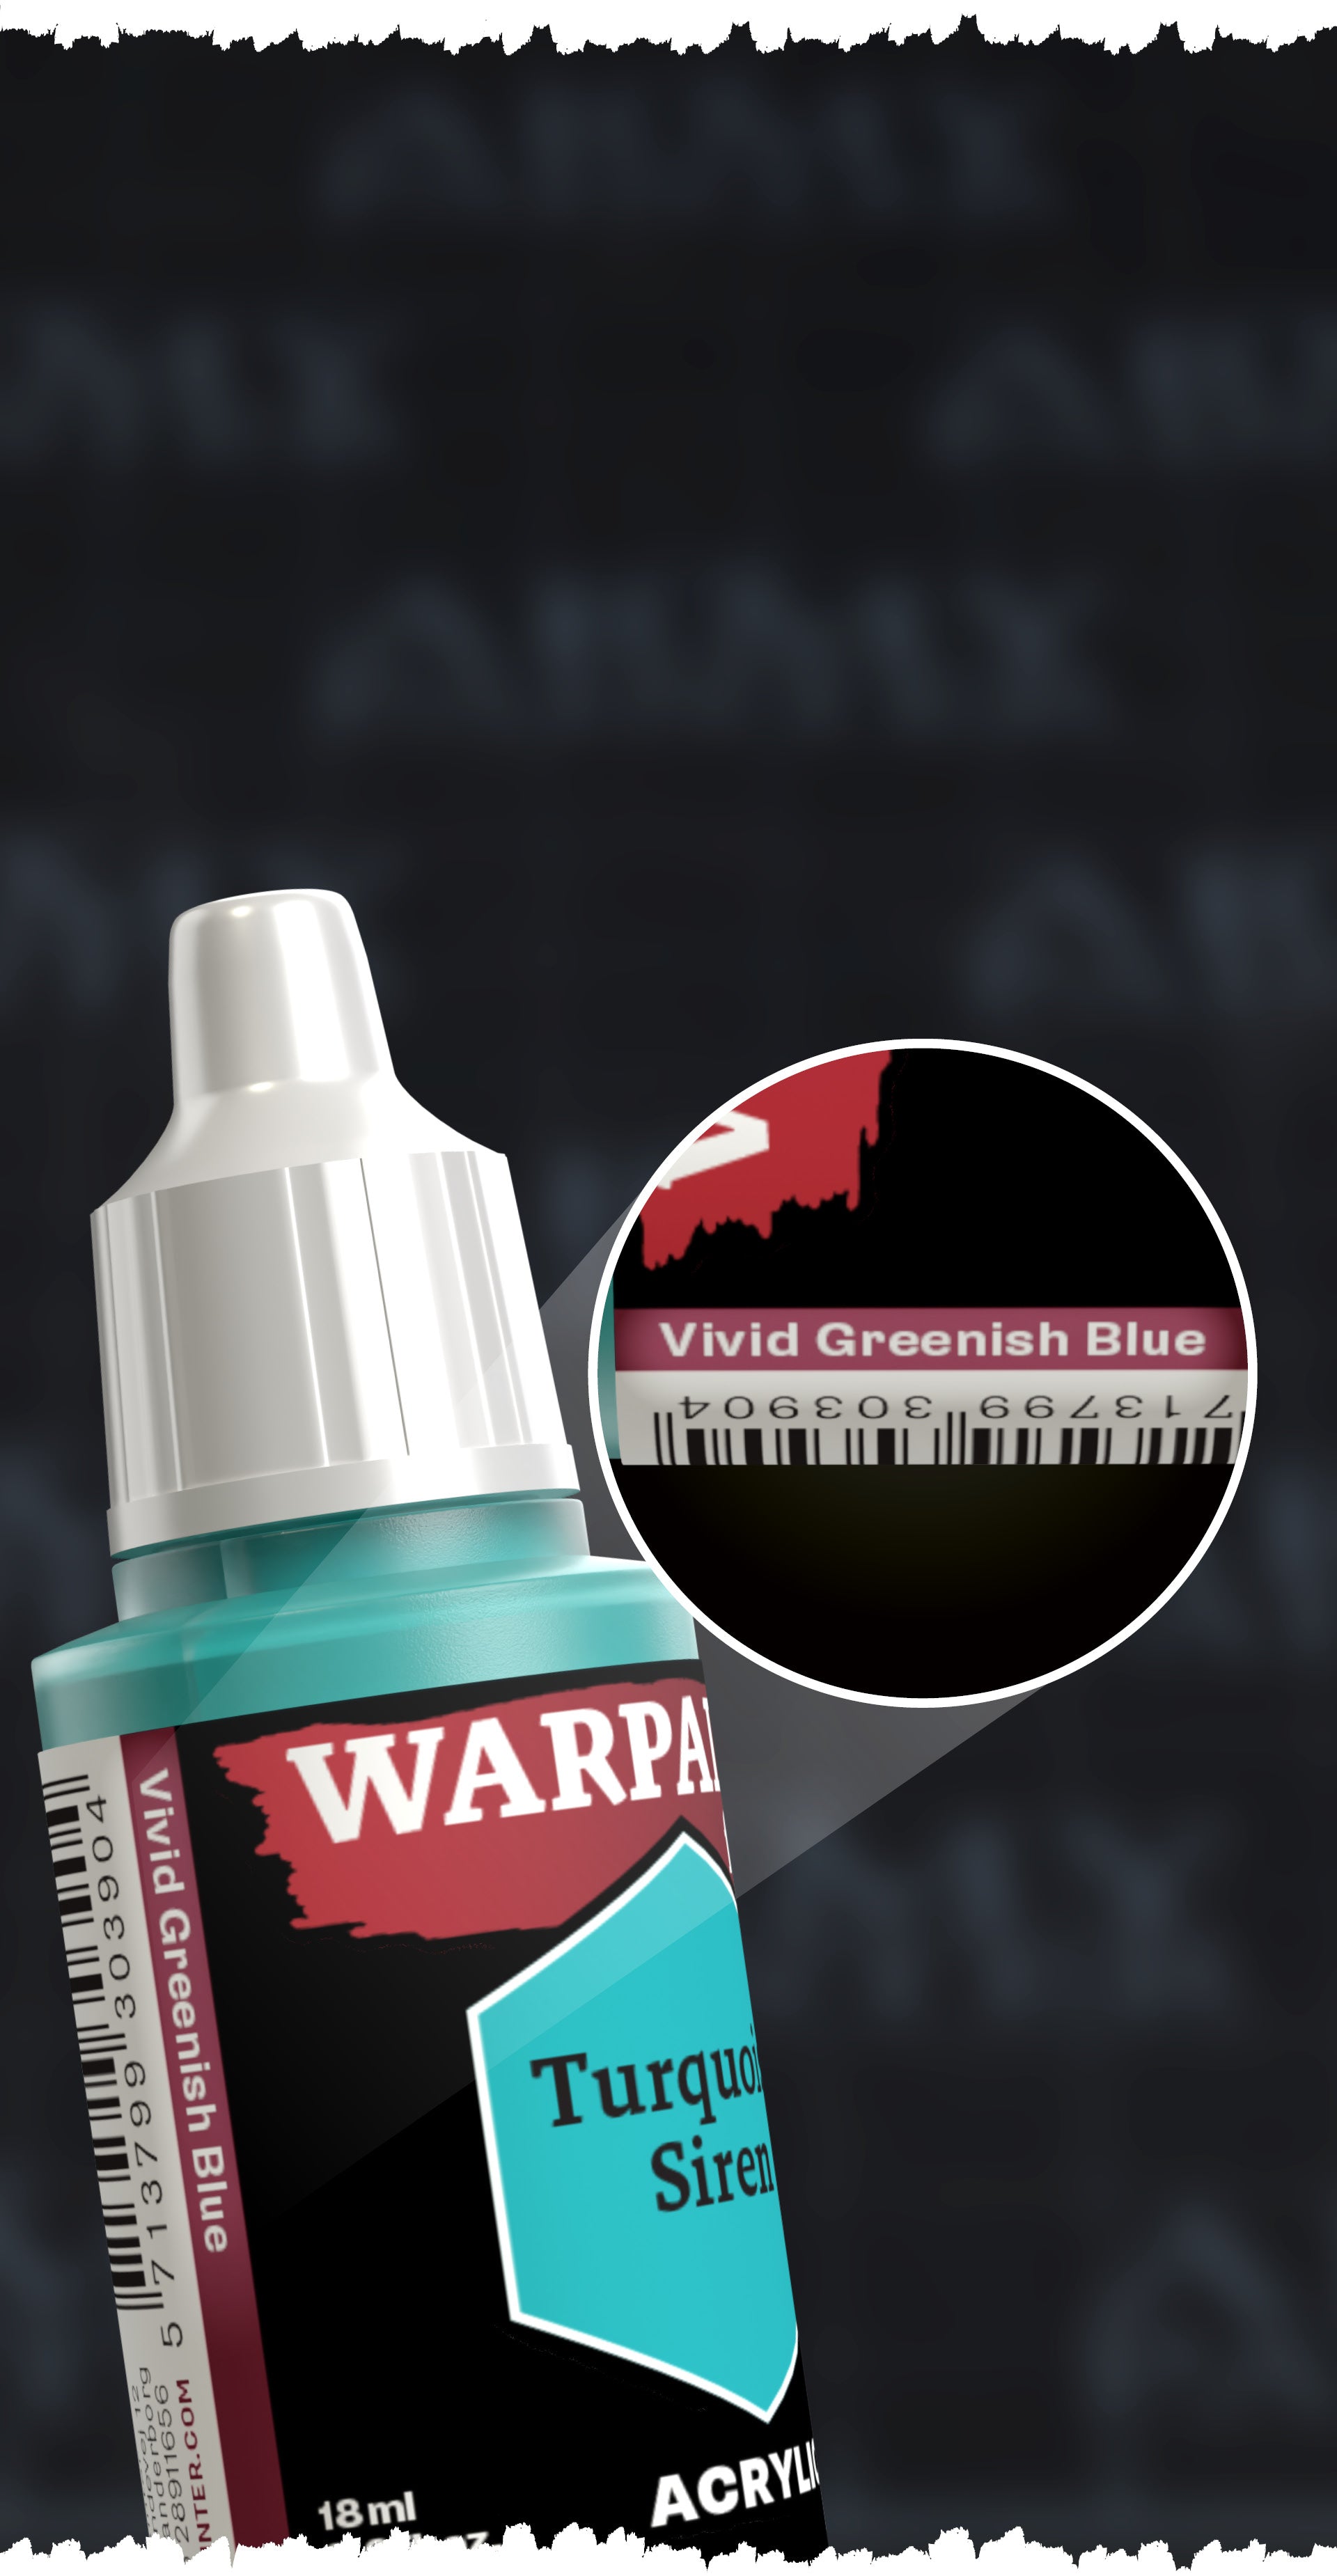 Warpaints Fanatic Rack — The Army Painter - PHD Games